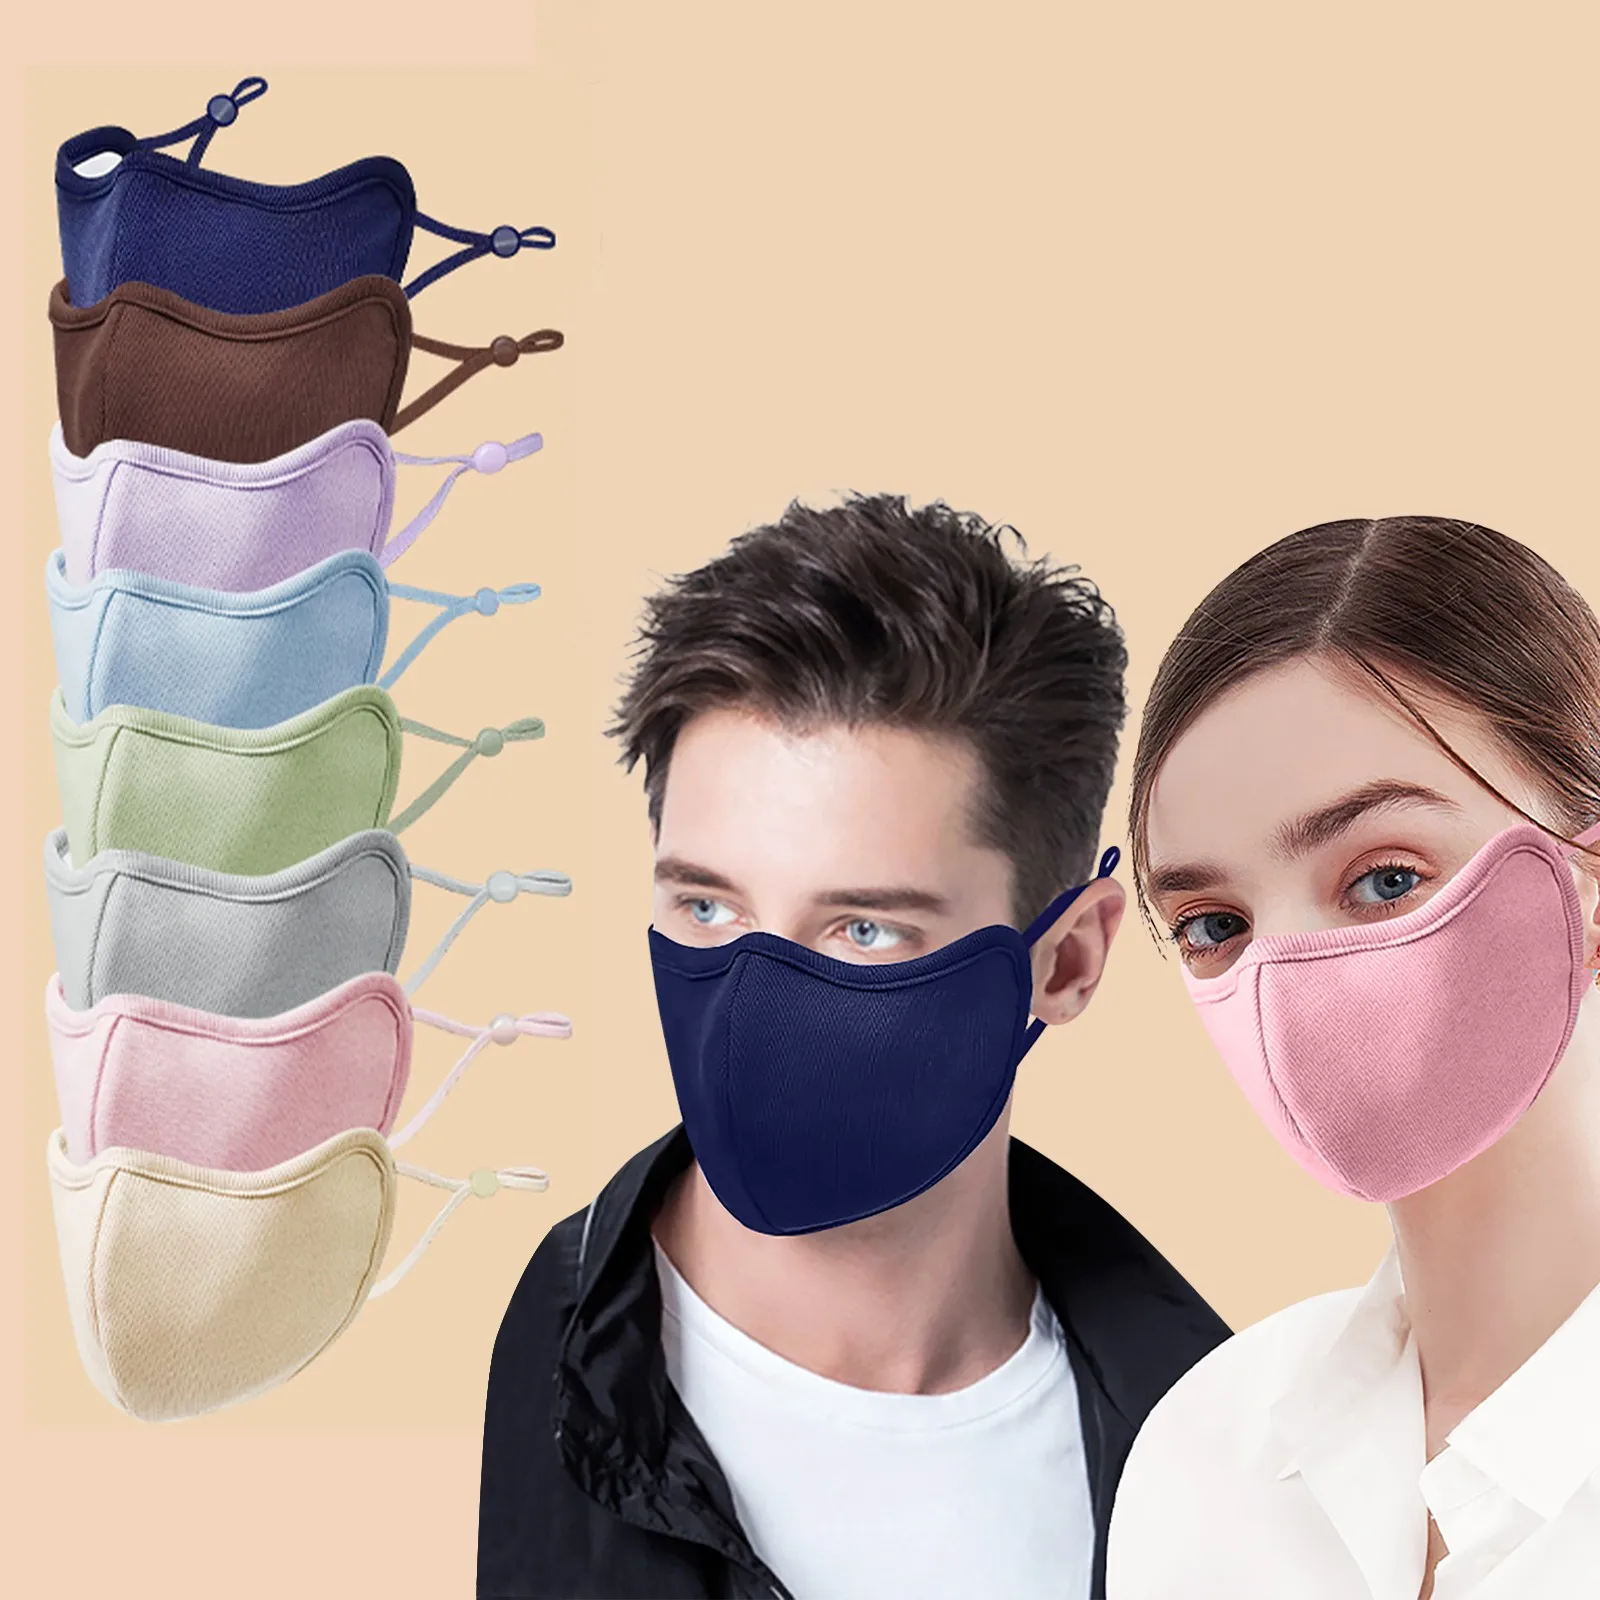 cheap halloween costumes Halloween Cosplay 2pcs Adult Protective Mask Anti Dust Mouth Mask Cotton Masks Washable Reusable Adjustable Face Mask Cubrebocas easy mens halloween costumes